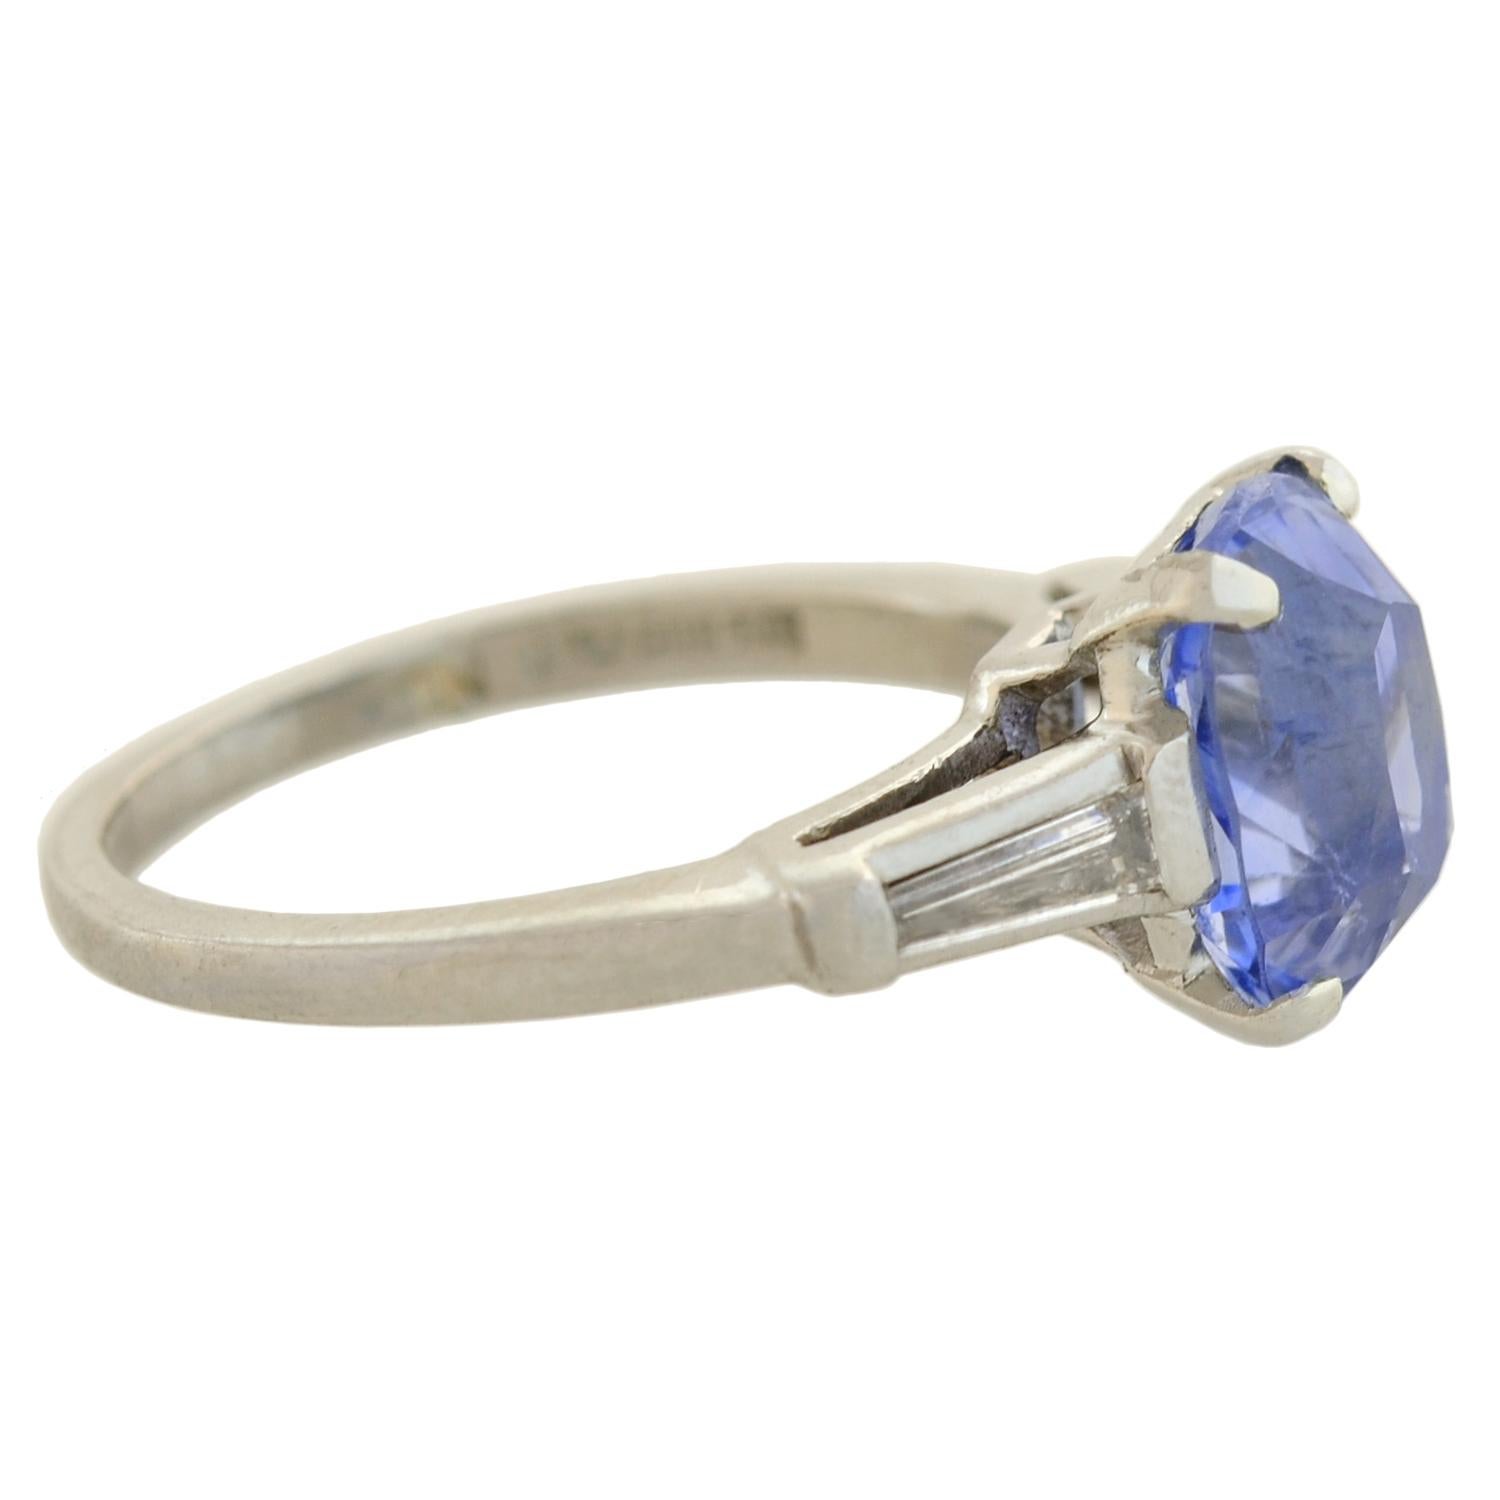 An exquisite sapphire ring from the Retro (ca1940s) era! Crafted in platinum, this fantastic piece holds a stunning natural sapphire at the center, framed by sparkling diamonds at either shoulder. The Ceylon (Sri Lankan) sapphire has an exact weight